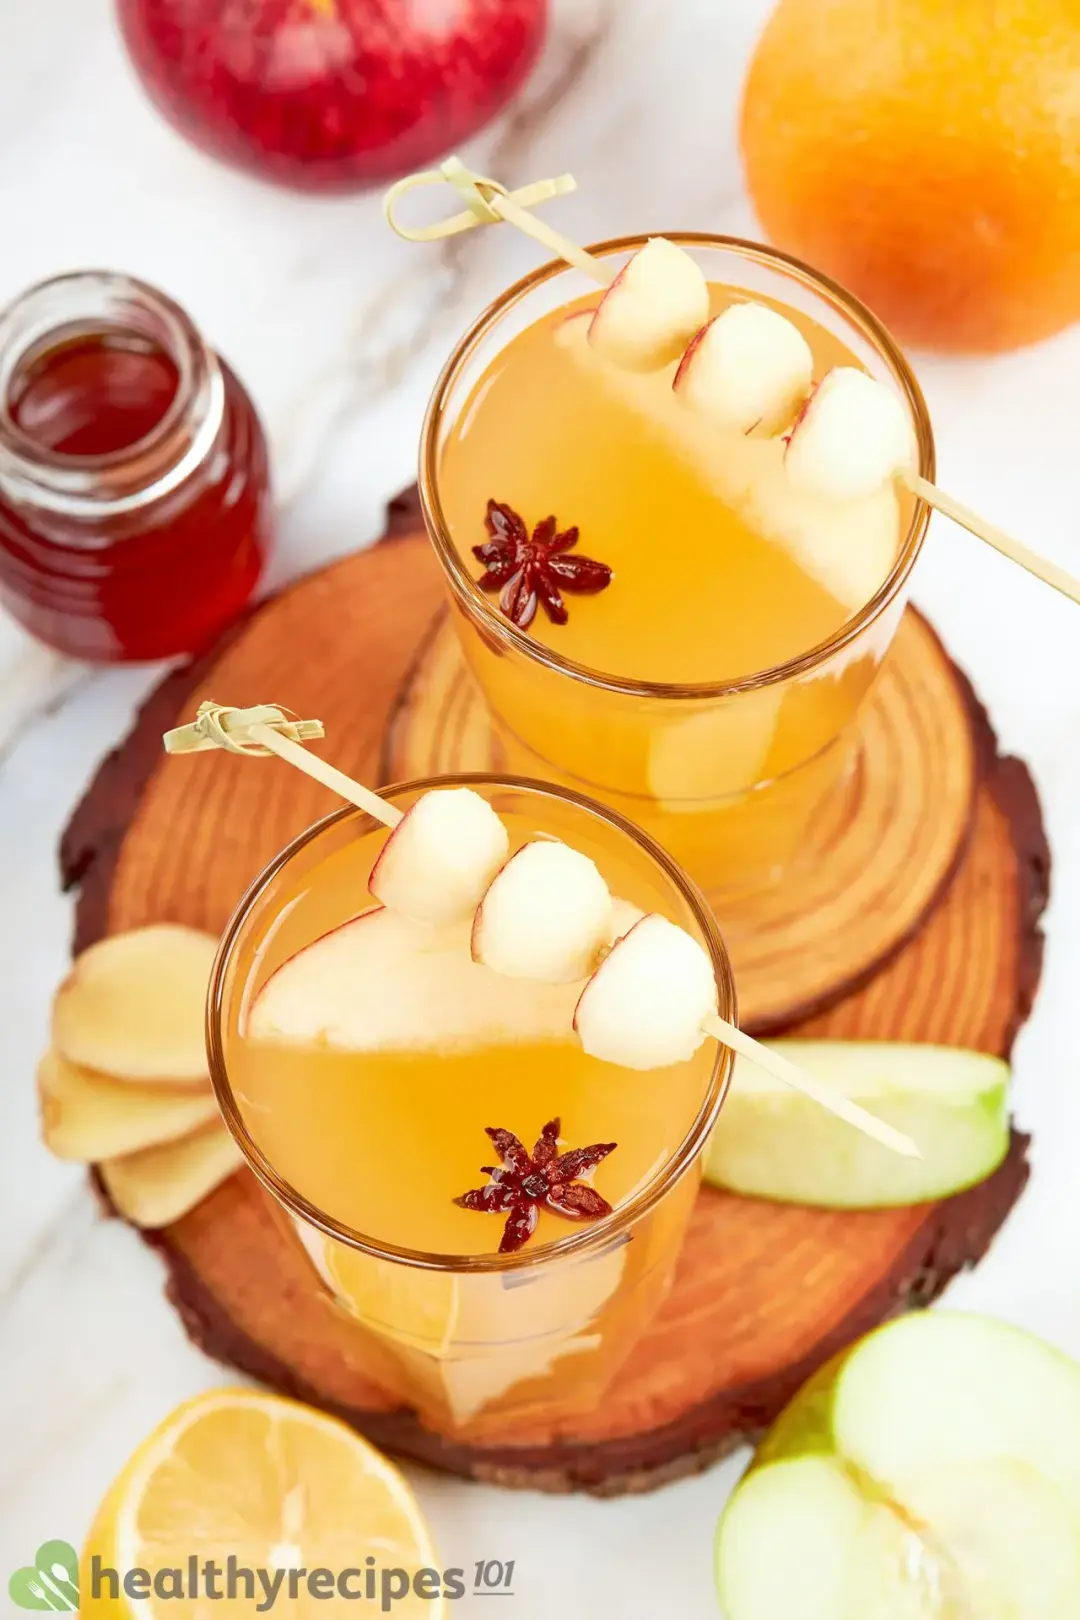 Two glasses of hot toddy cocktails with star anise and apple ball skewers, next to apples and a jar of honey